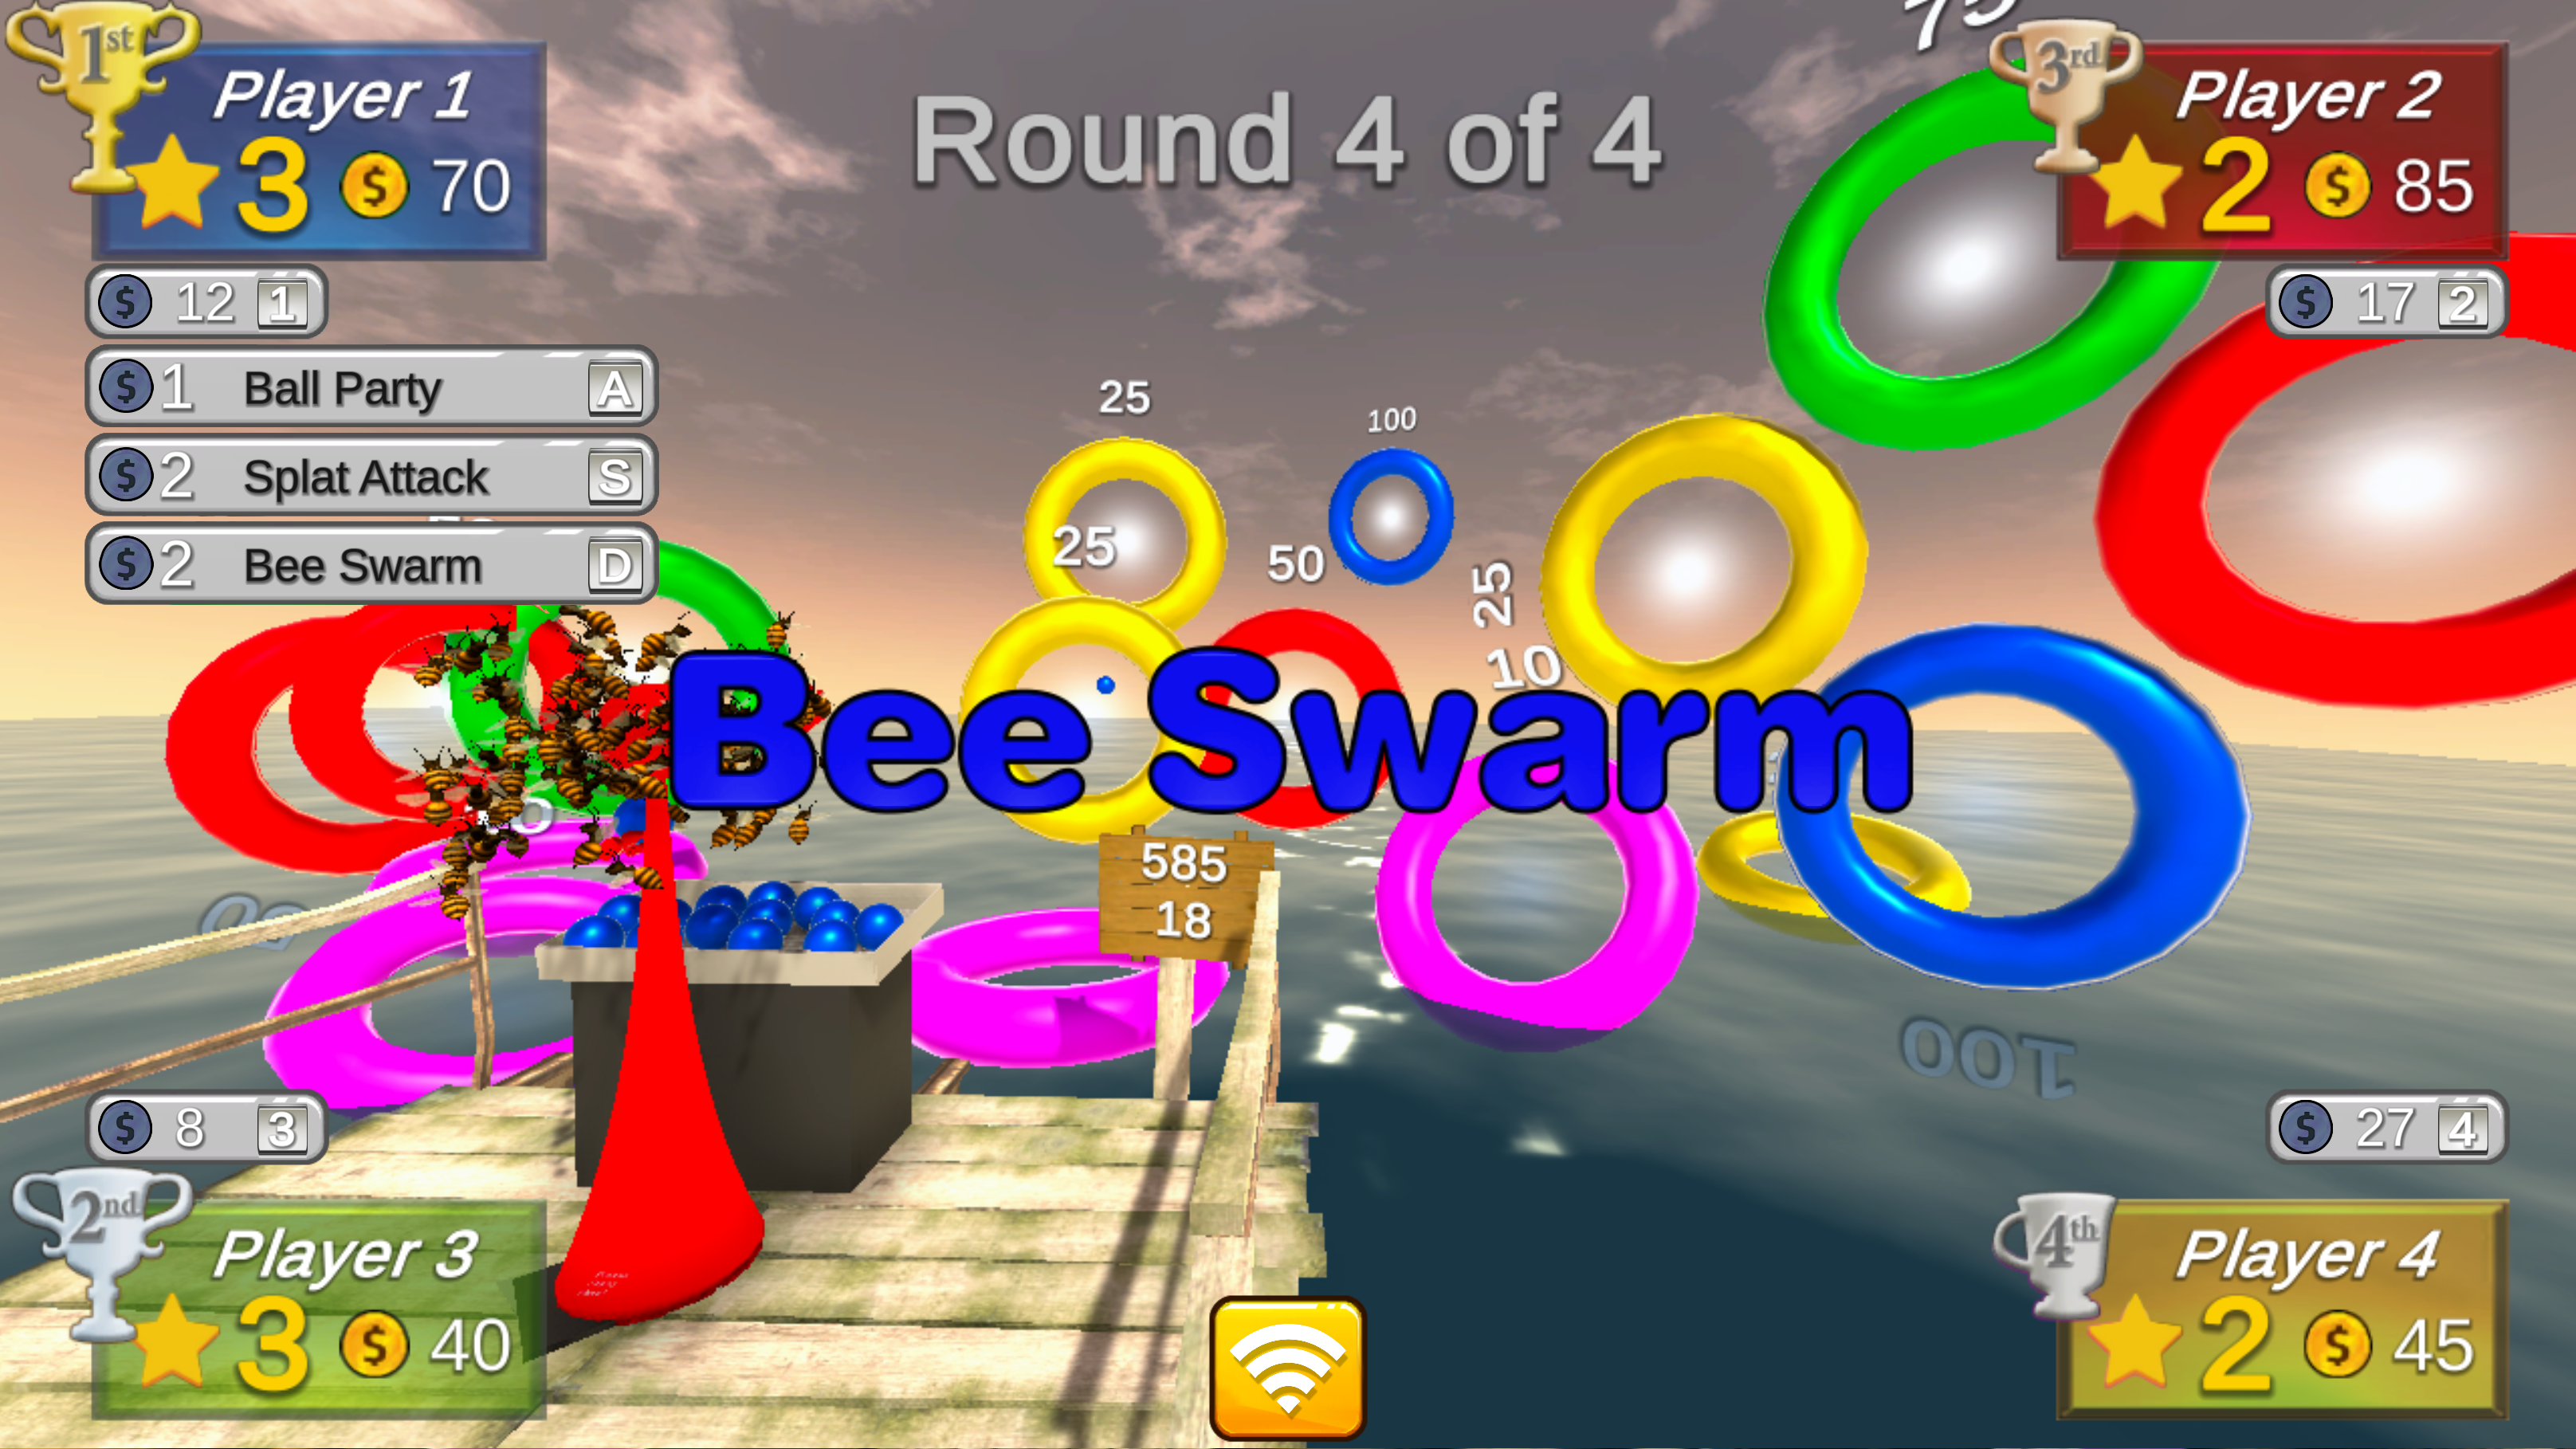 Throwing balls is made harder by the addition of more bees! Nuisance Attack in VR Party Club